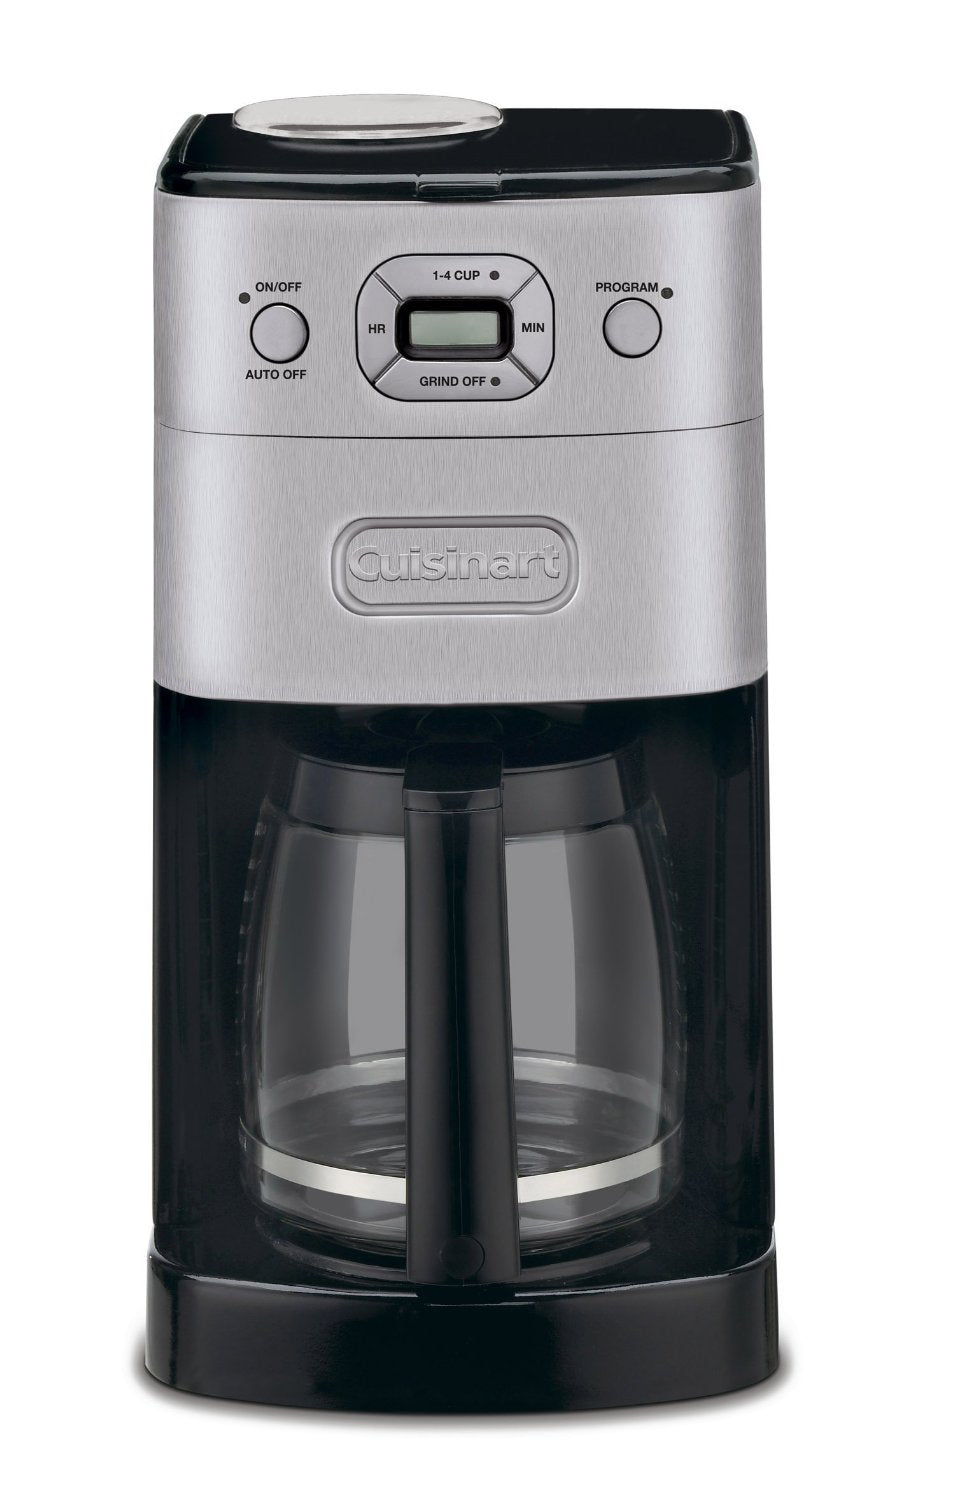 Cuisinart Dgb 625 12 Cup Automatic Coffeemaker Base